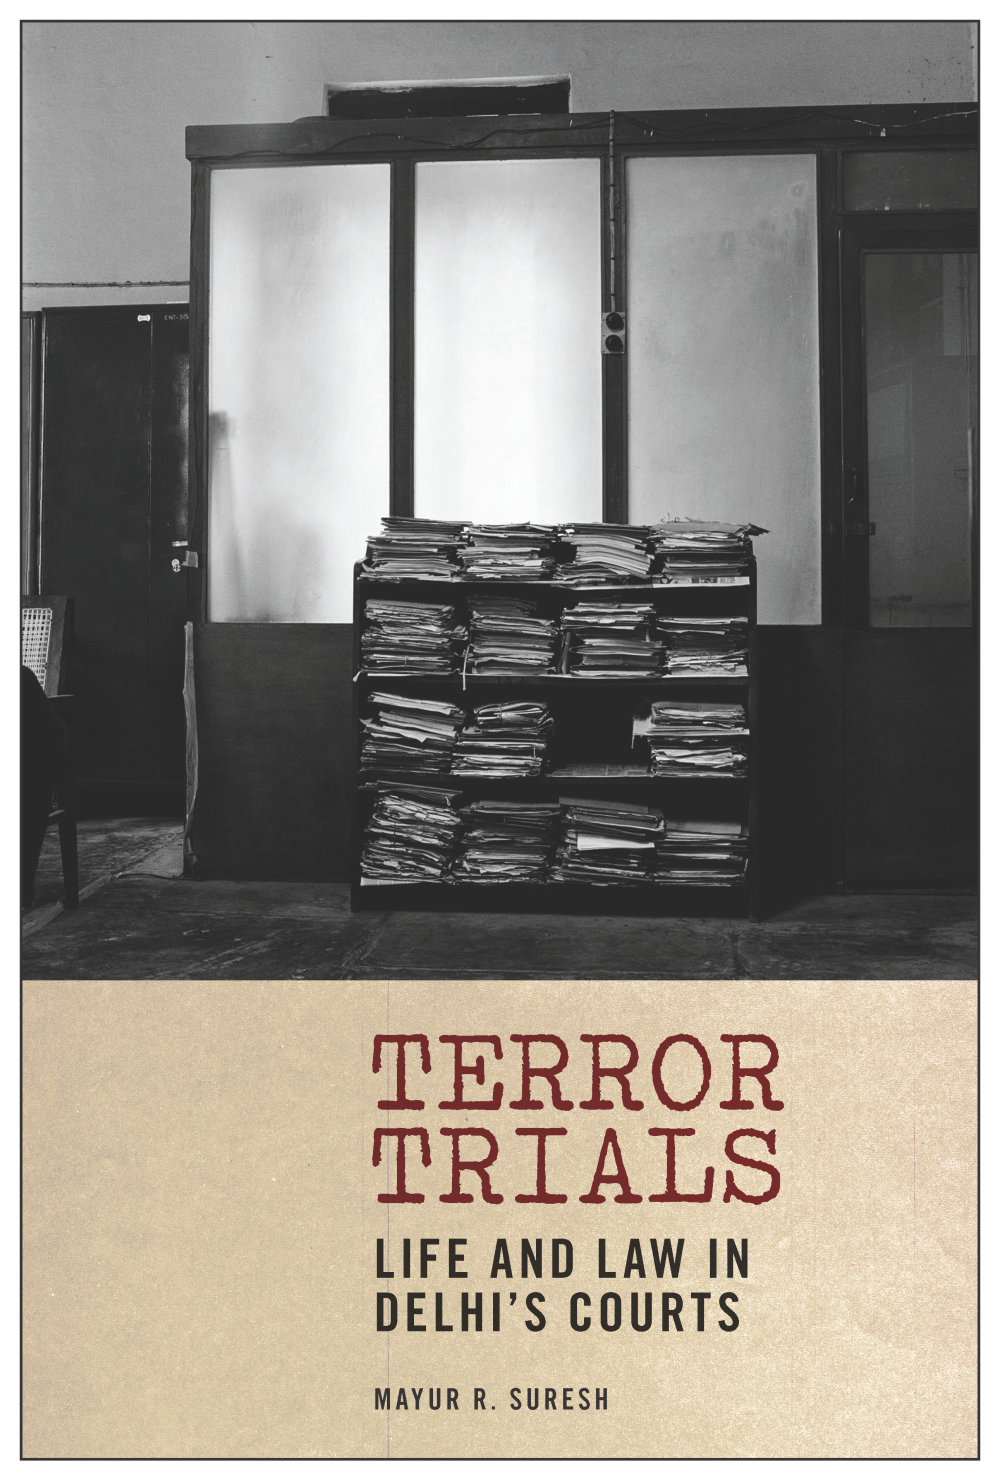 Image of book 'Terror Trials: Life and Law in Delhi's Courts'